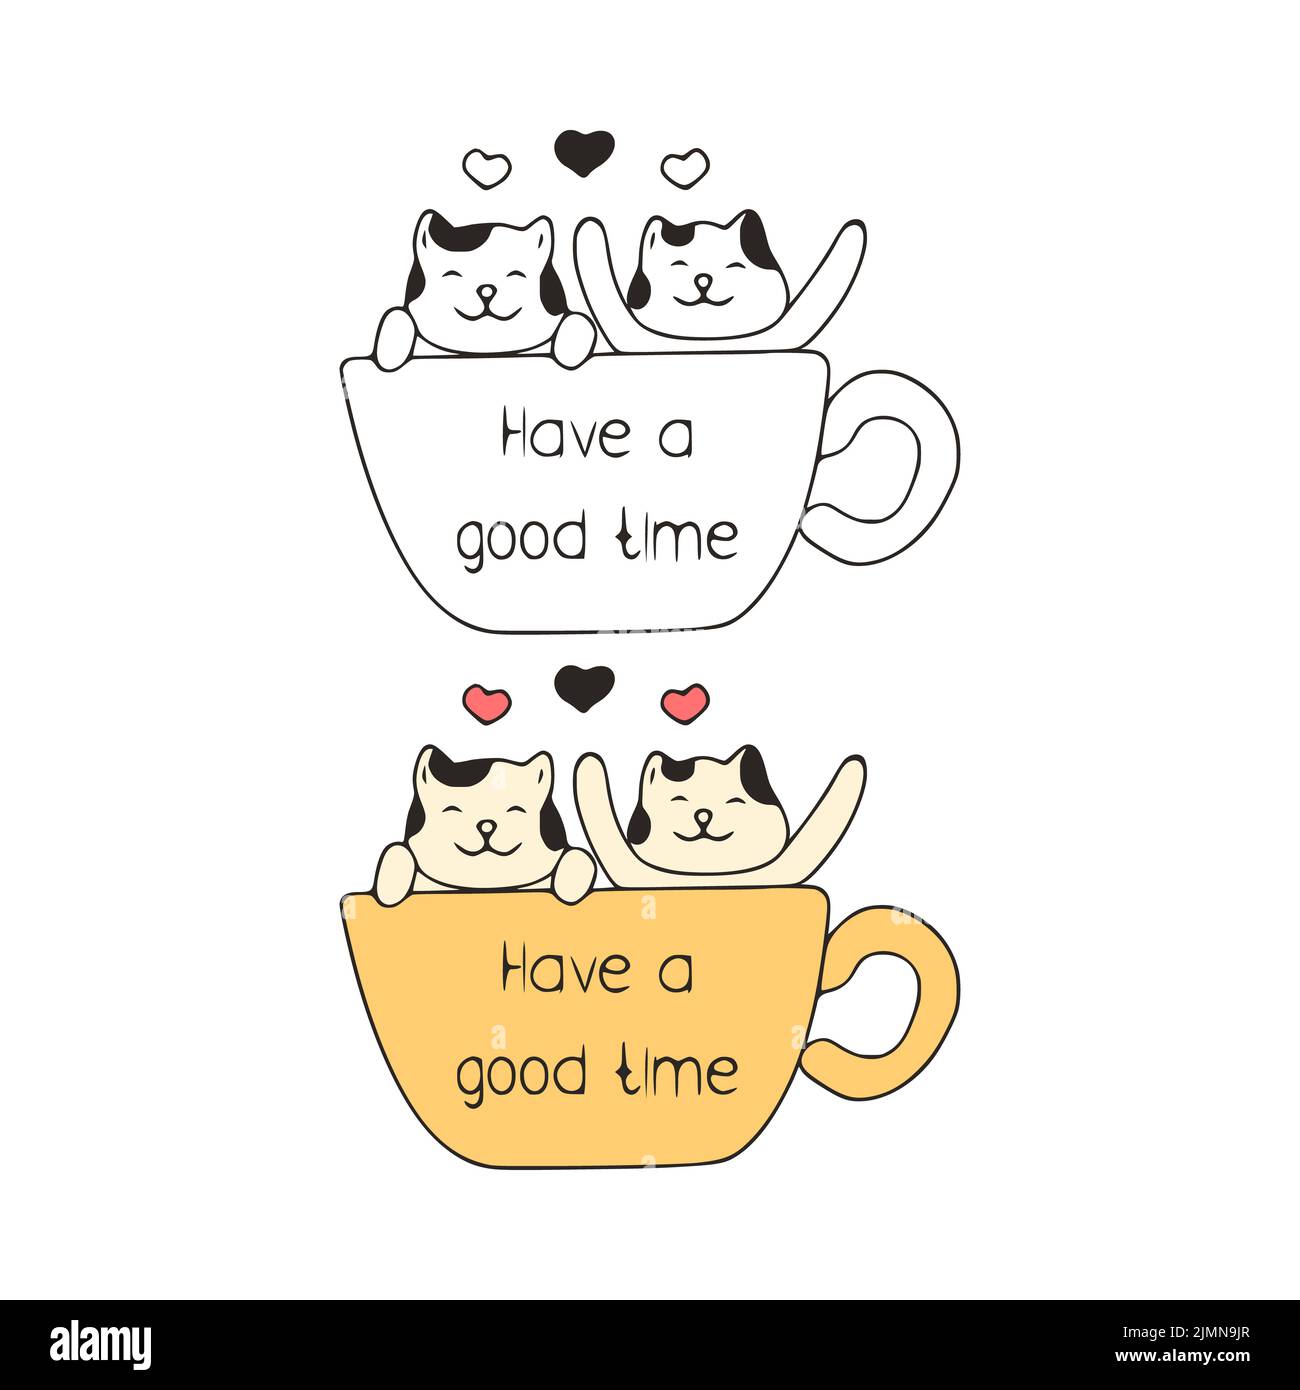 Funny cats in a cup doodle icon, Have a good time artwork. Cute pets vector art on white background. Stock Photo